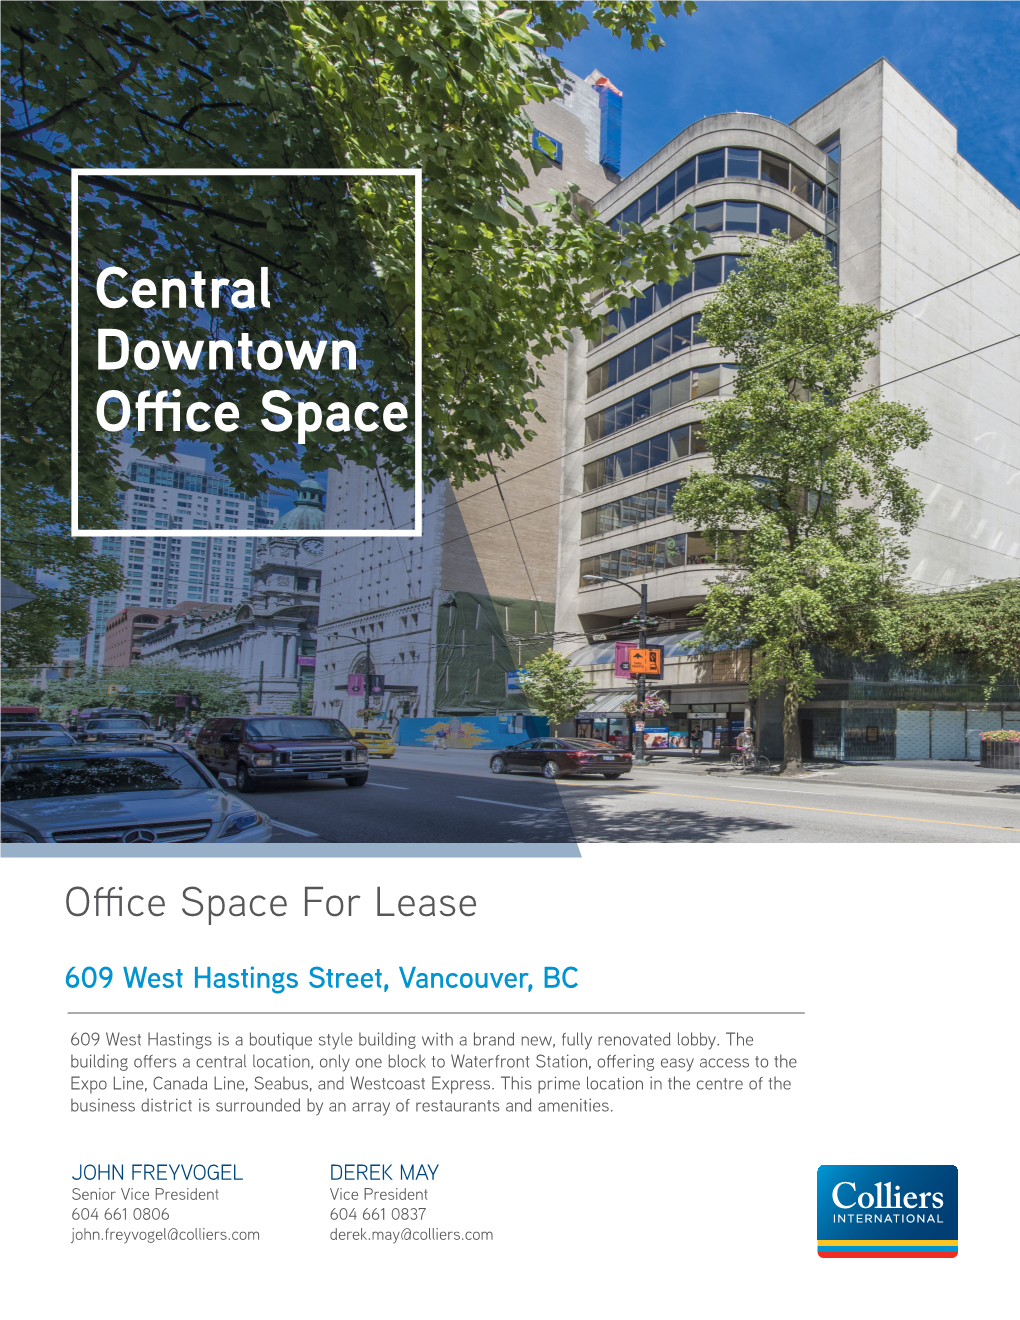 Central Downtown Office Space